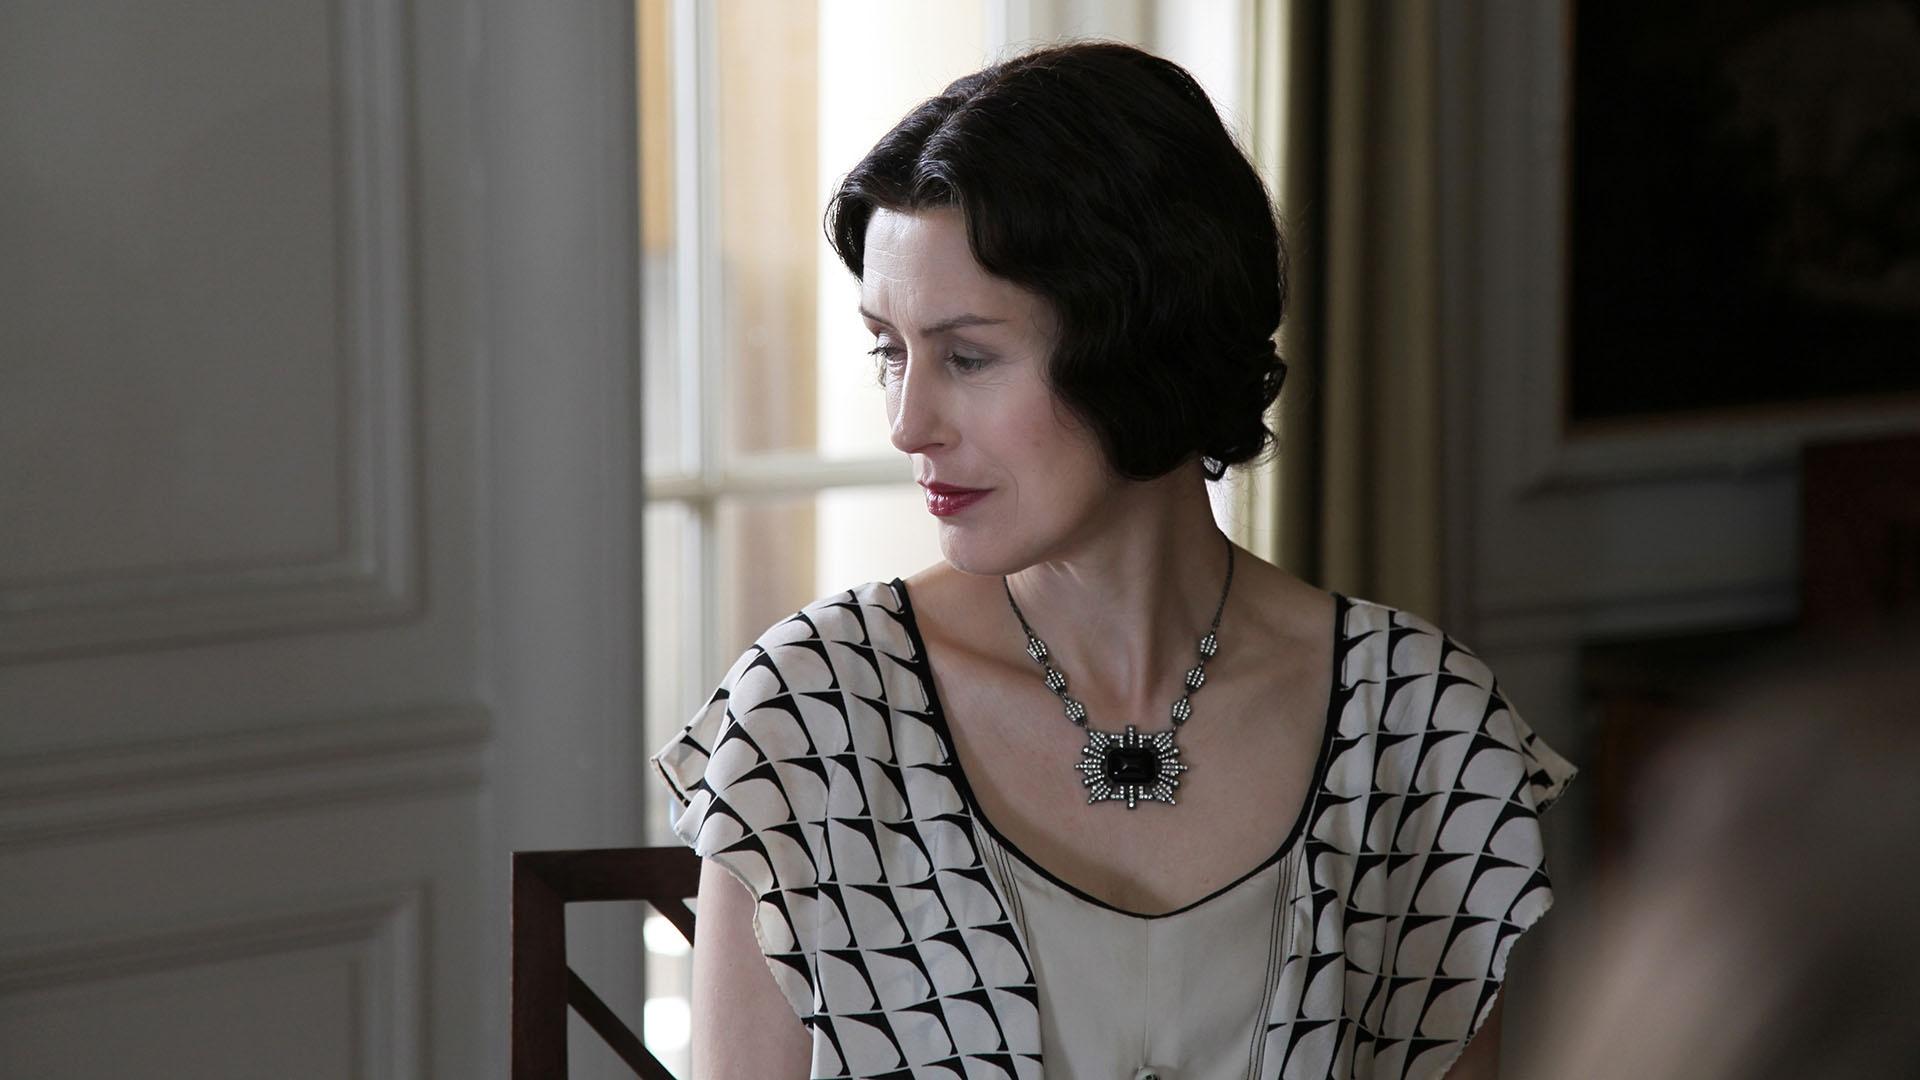 Wallis Simpson (Gina McKee) at a lunch party given by the Prince.